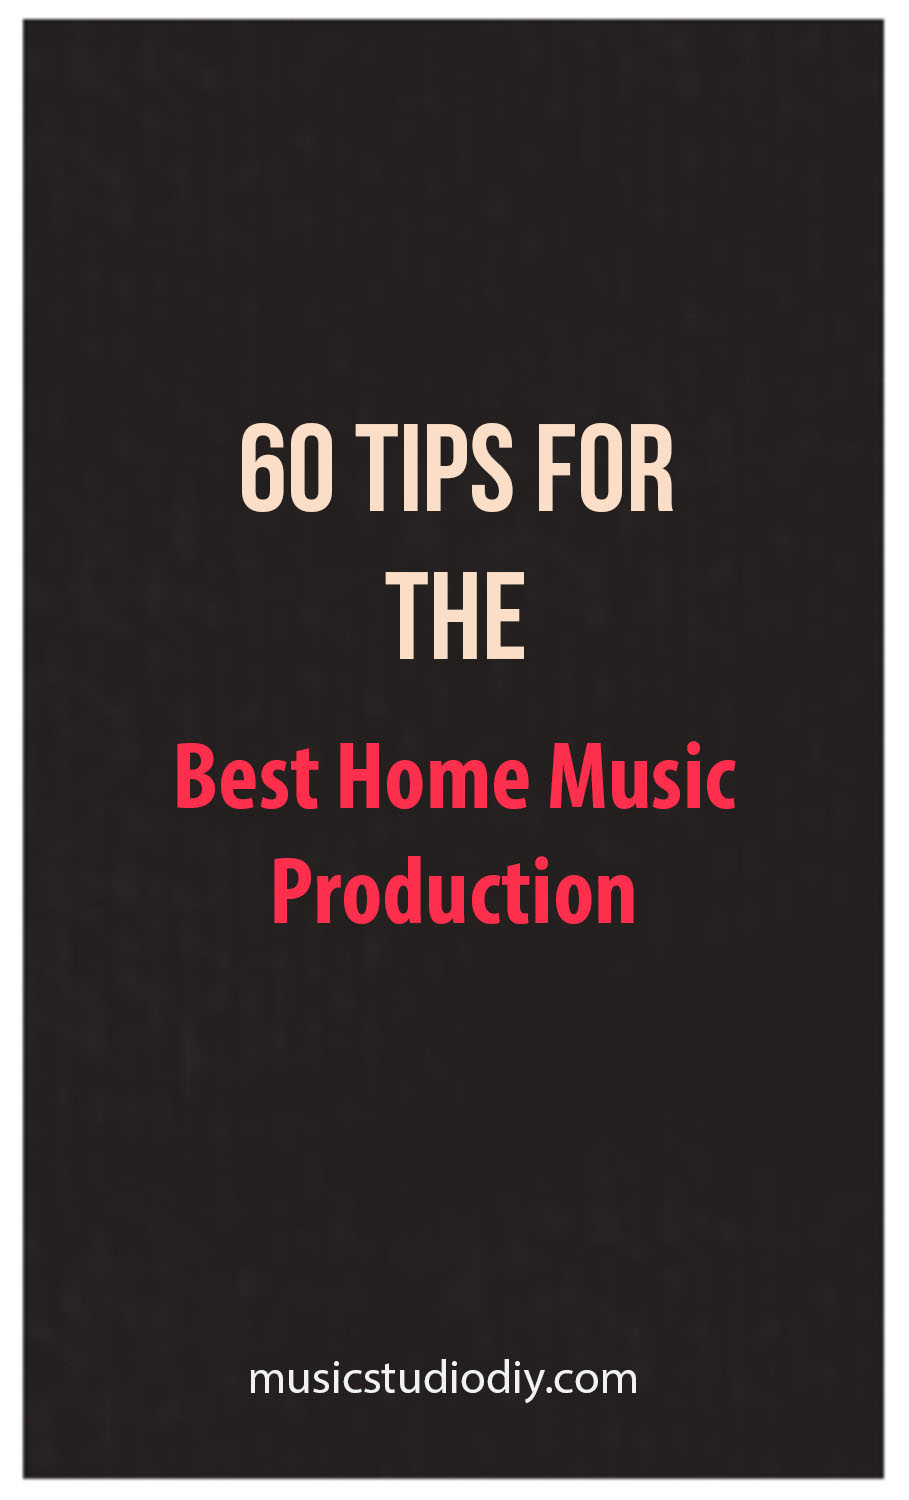 music production tips for a home music studio